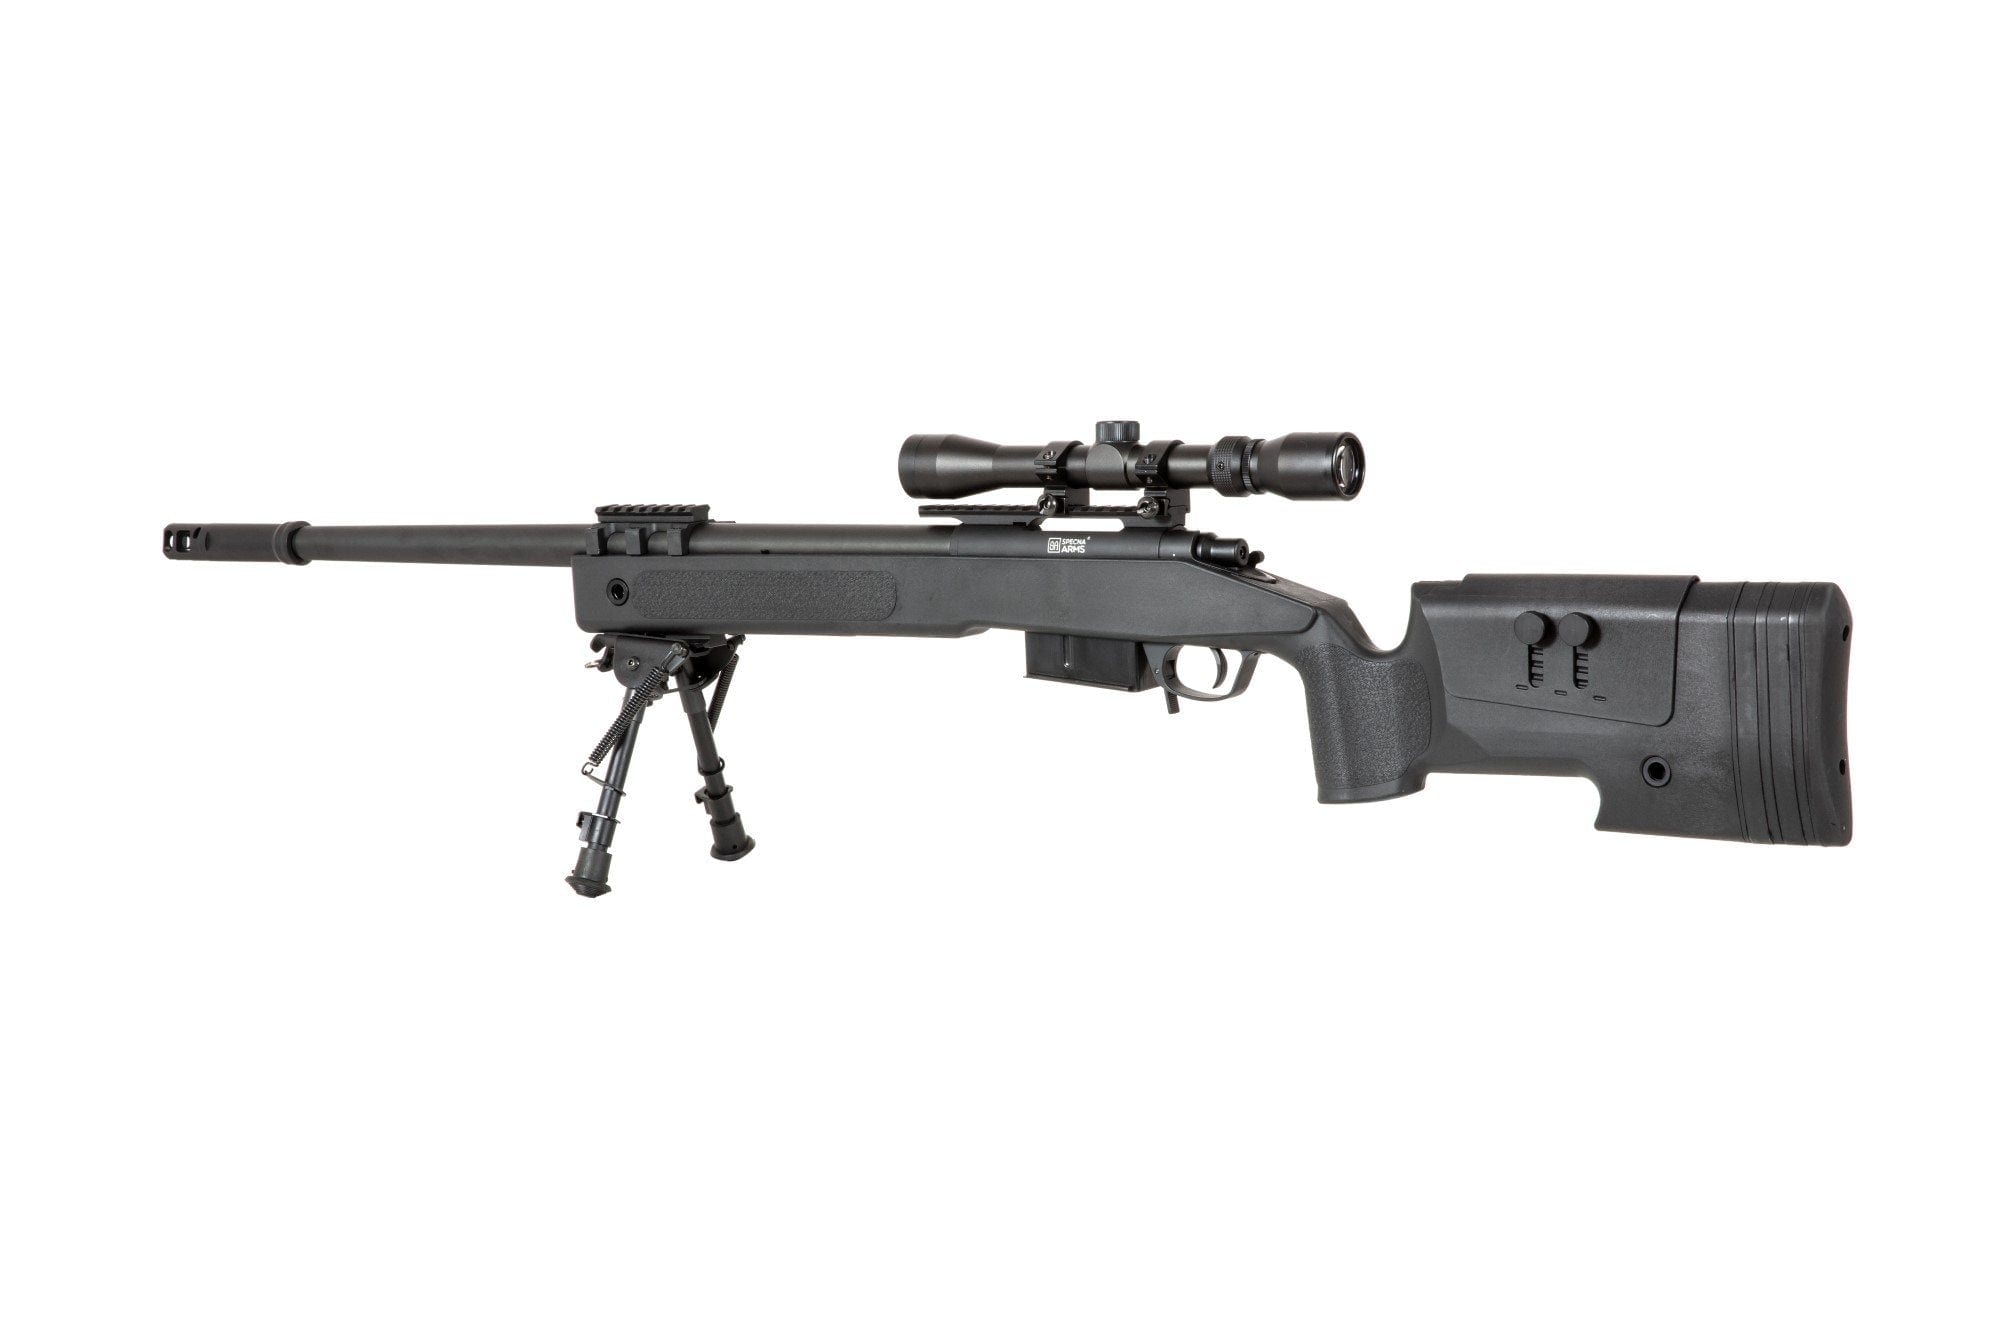 SA-CORE ™ S03 High Velocity Replica Sniper Rifle with Scope and Bipod - Black by Specna Arms on Airsoft Mania Europe